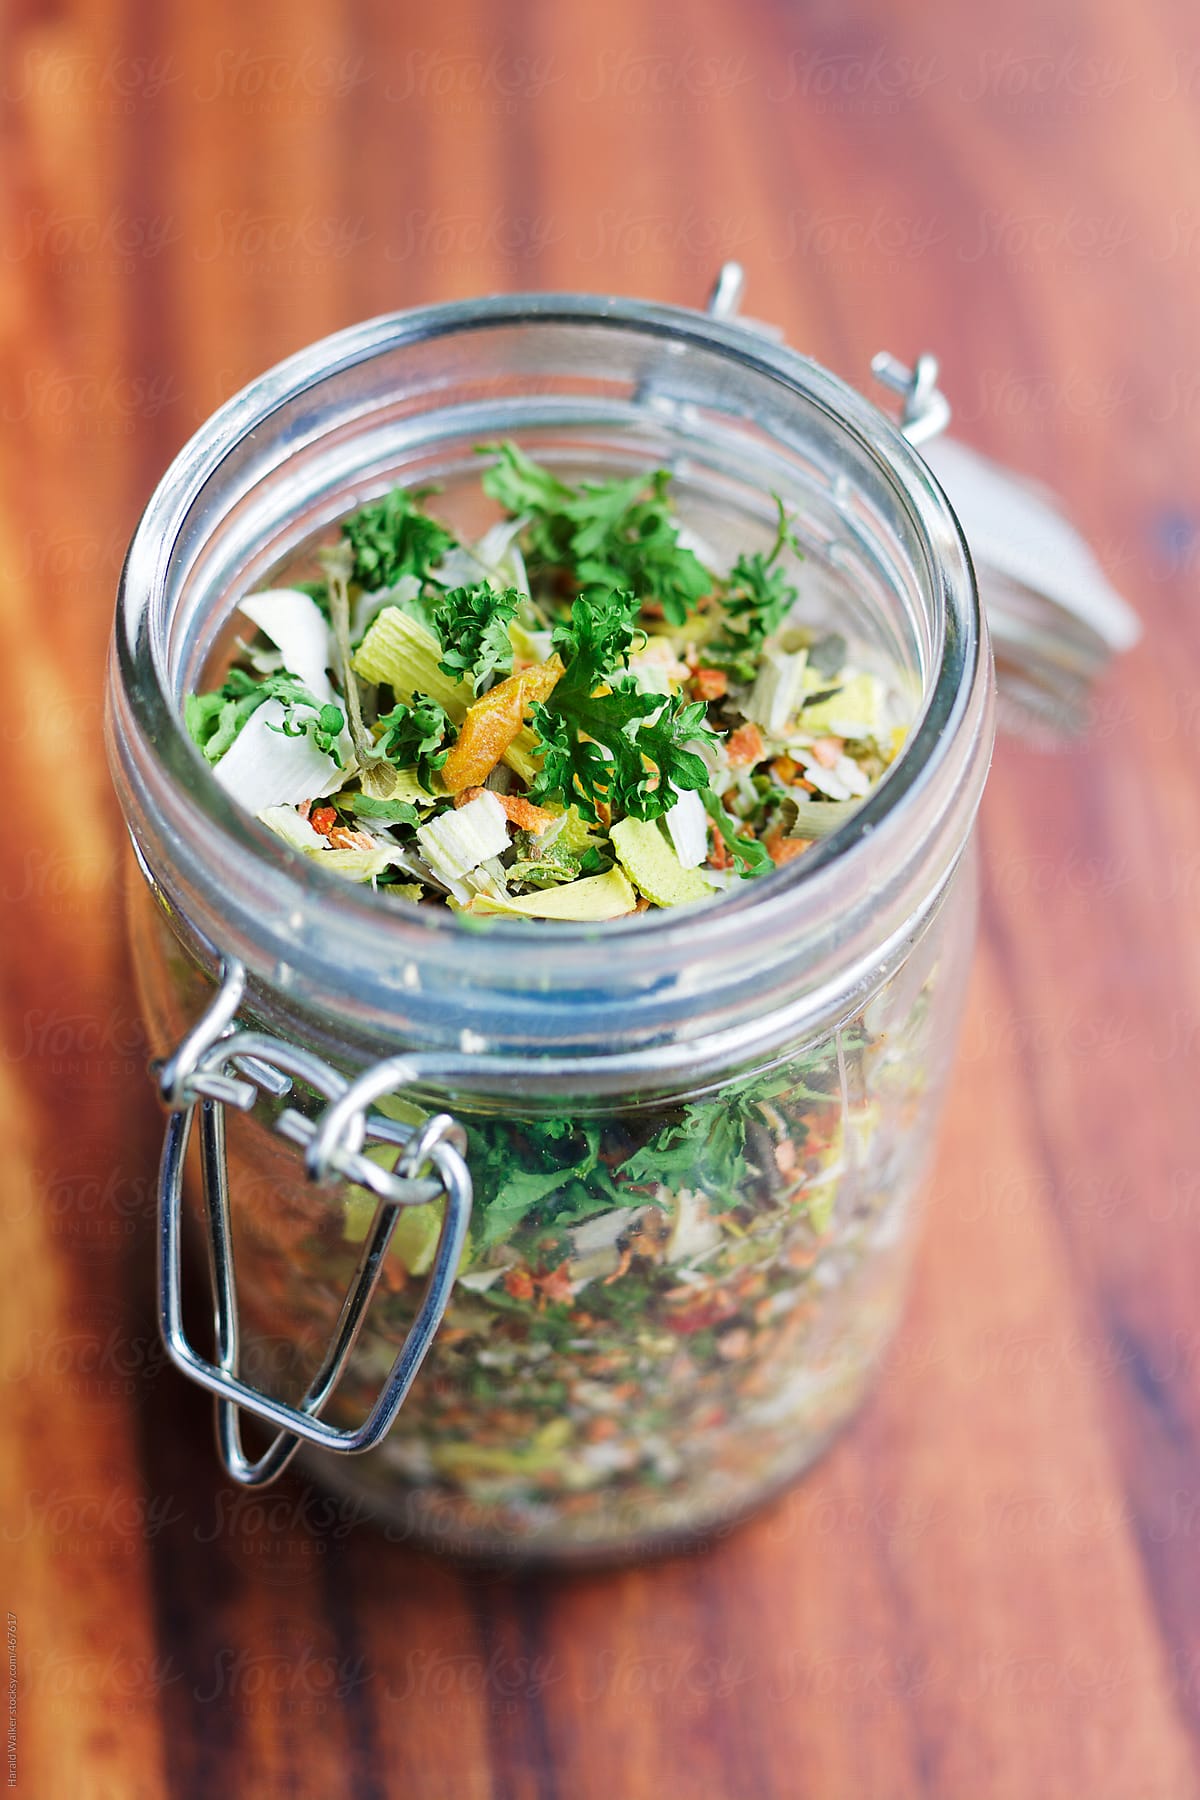 Homemade Dry Soup Mix in a jar